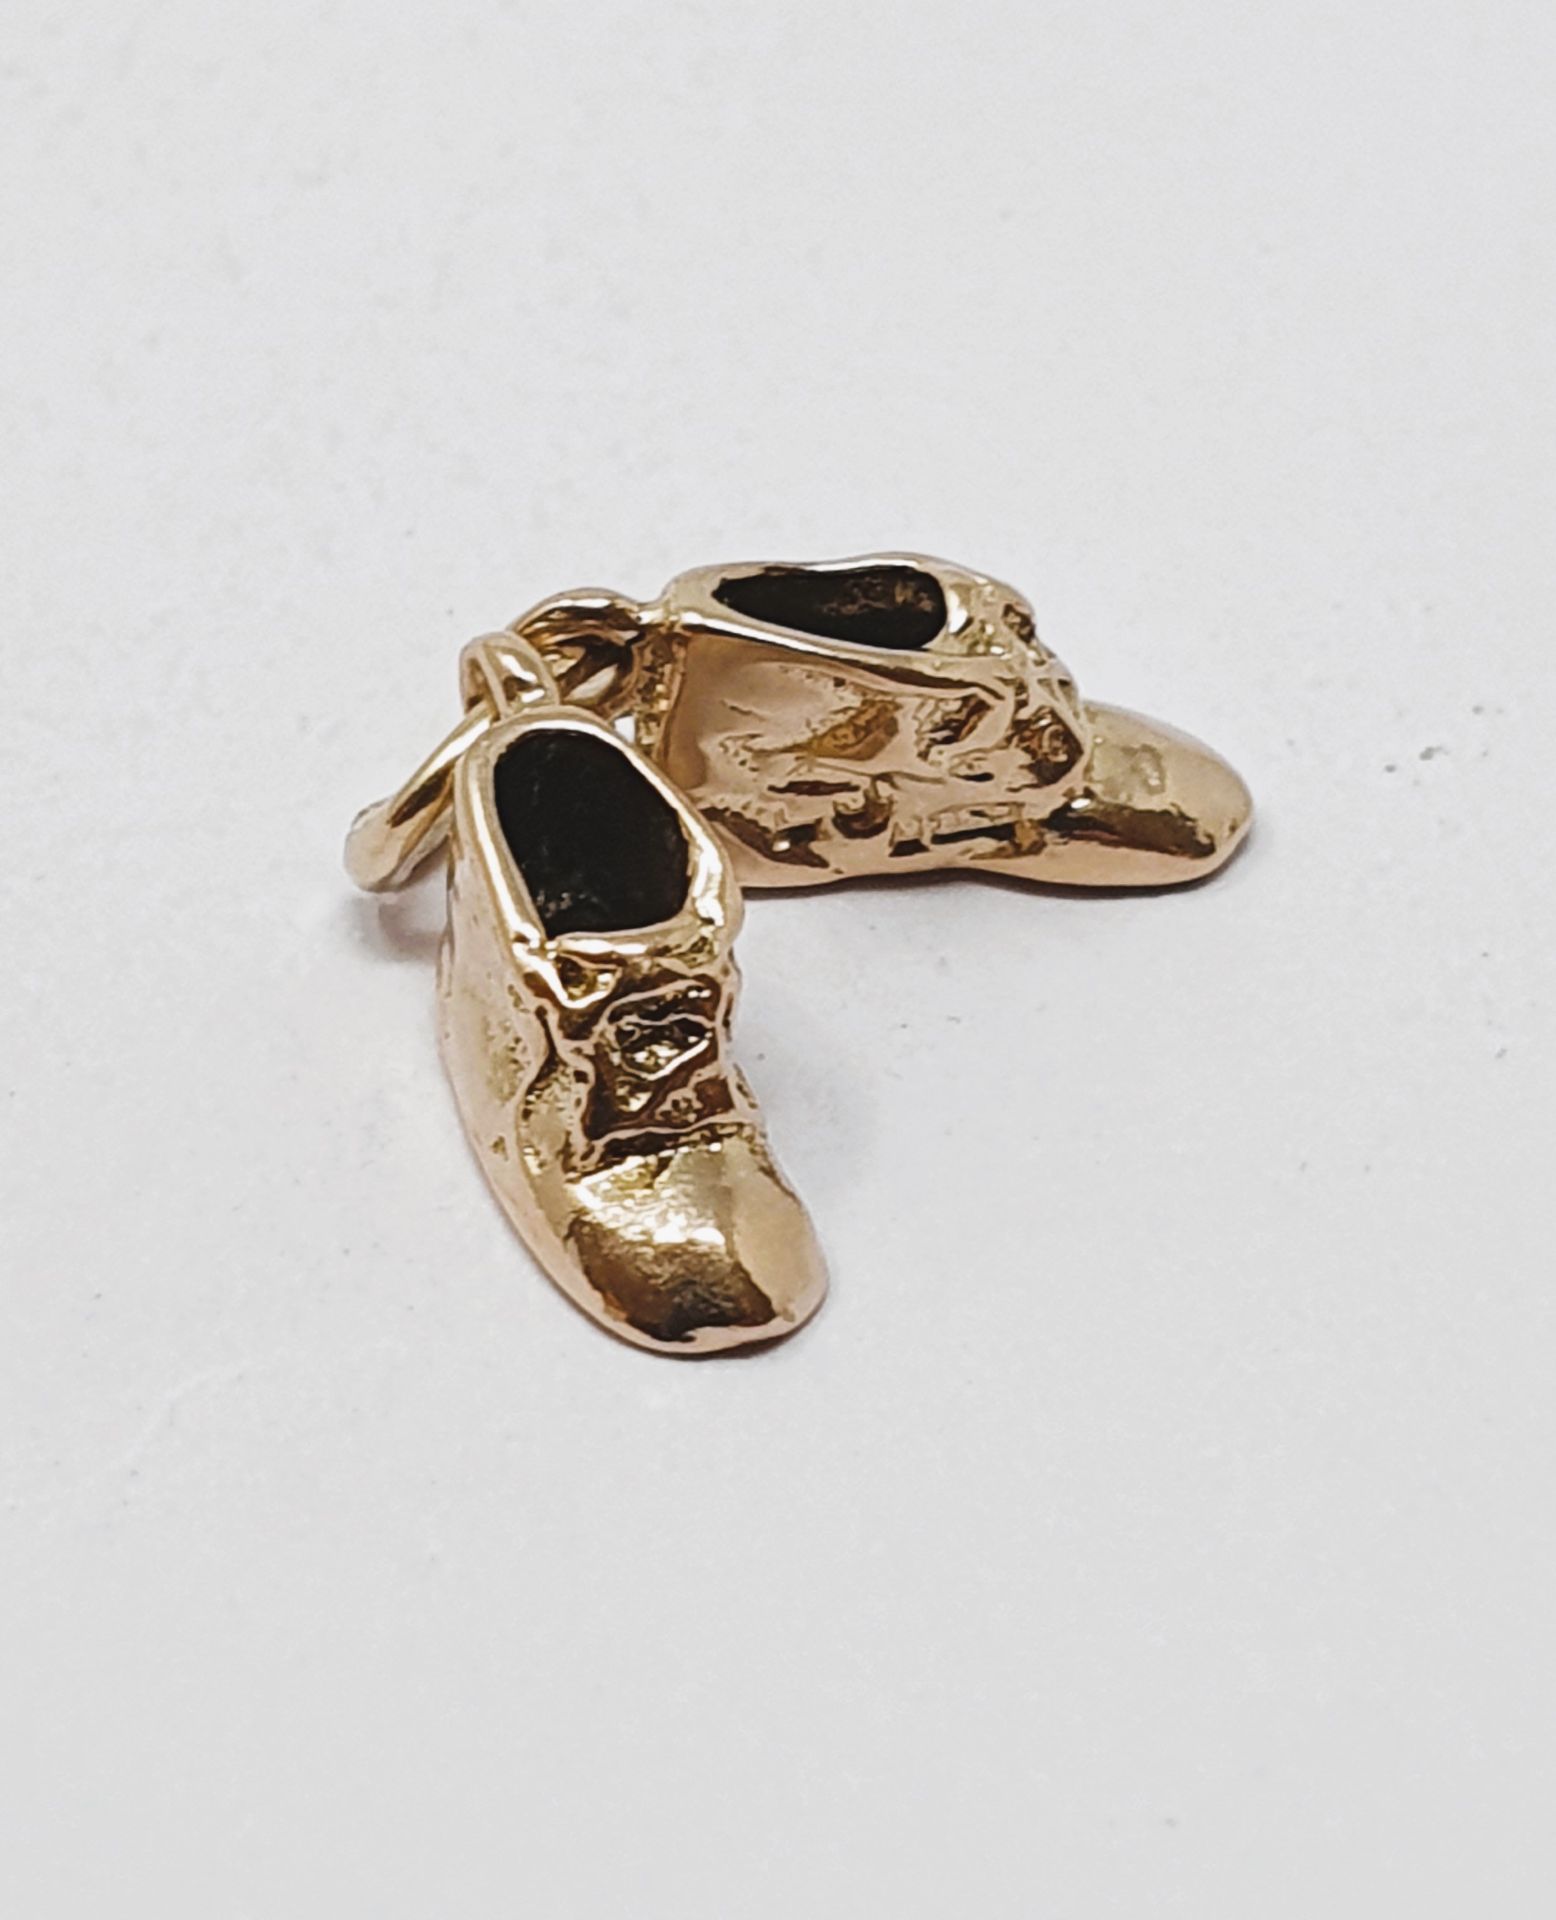 9ct gold vintage pair of boots charm, gross weight 1.